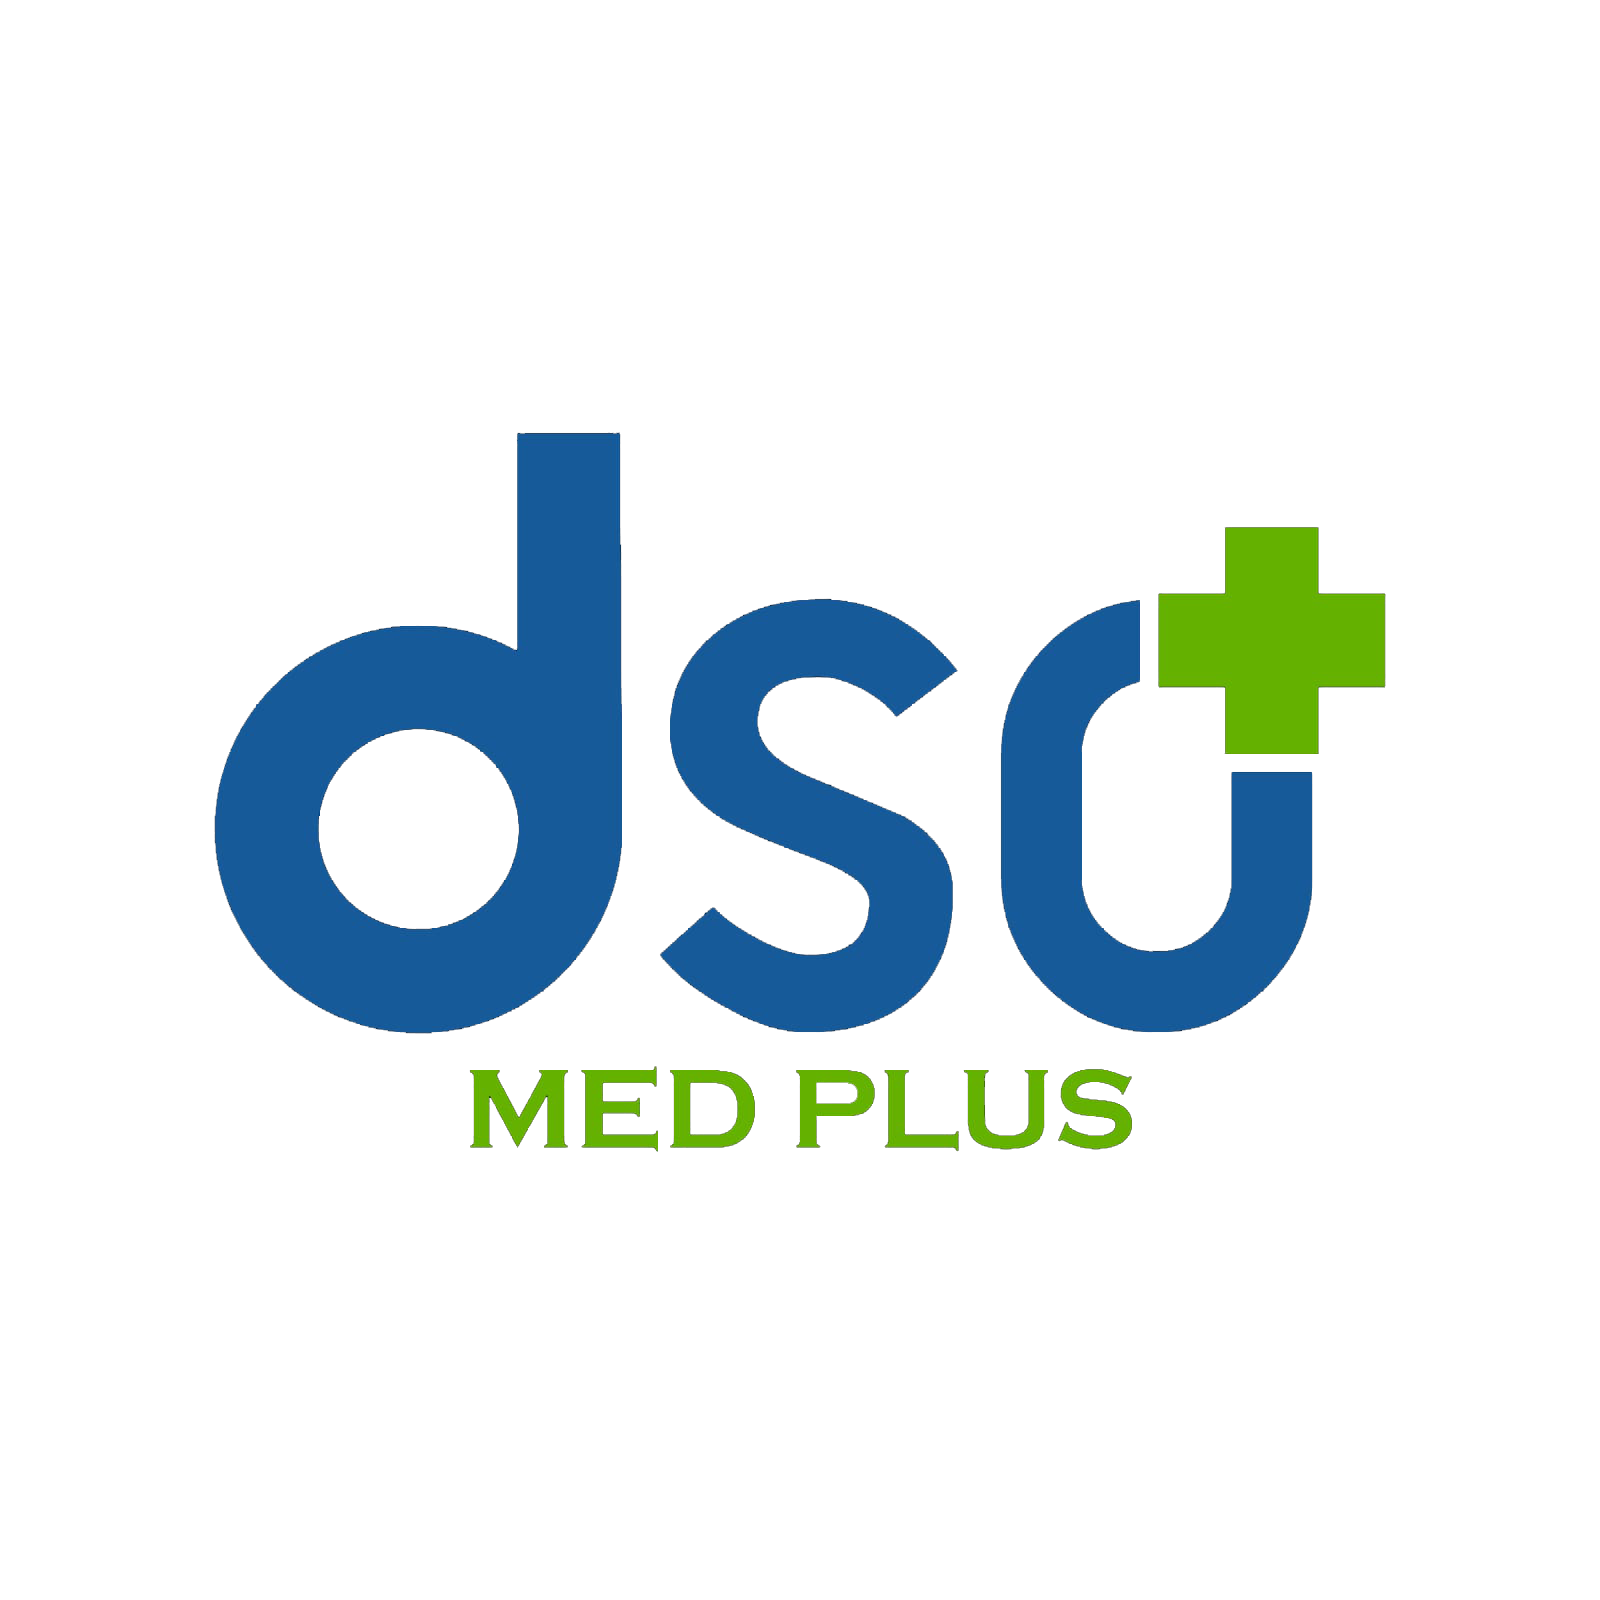 Business logo of Dsomedplus